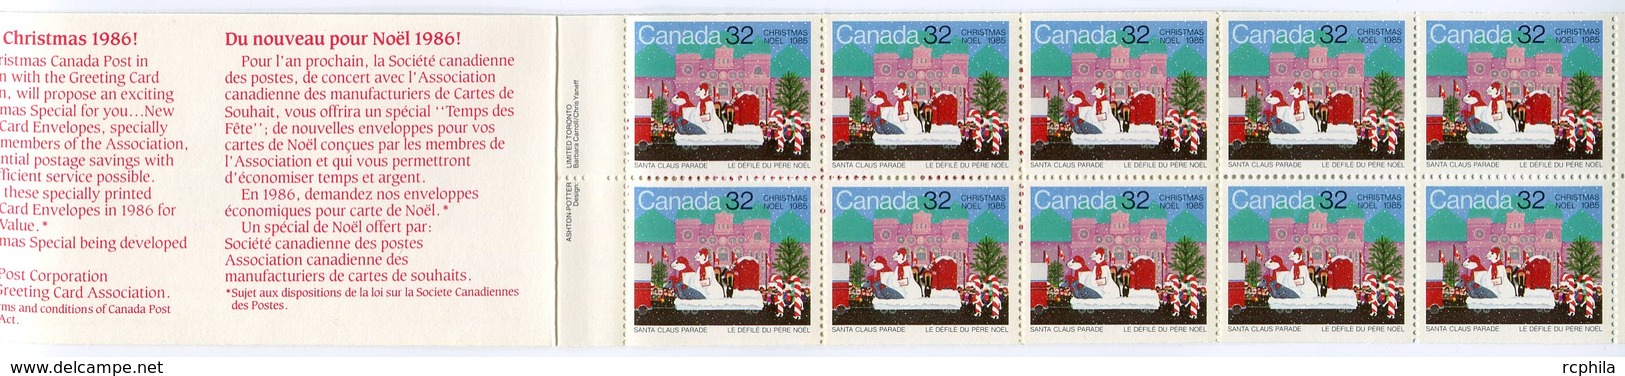 RC 16022 CANADA BK88 CHRISTMAS 1985 CARNET COMPLET BOOKLET MNH NEUF ** - Carnets Complets